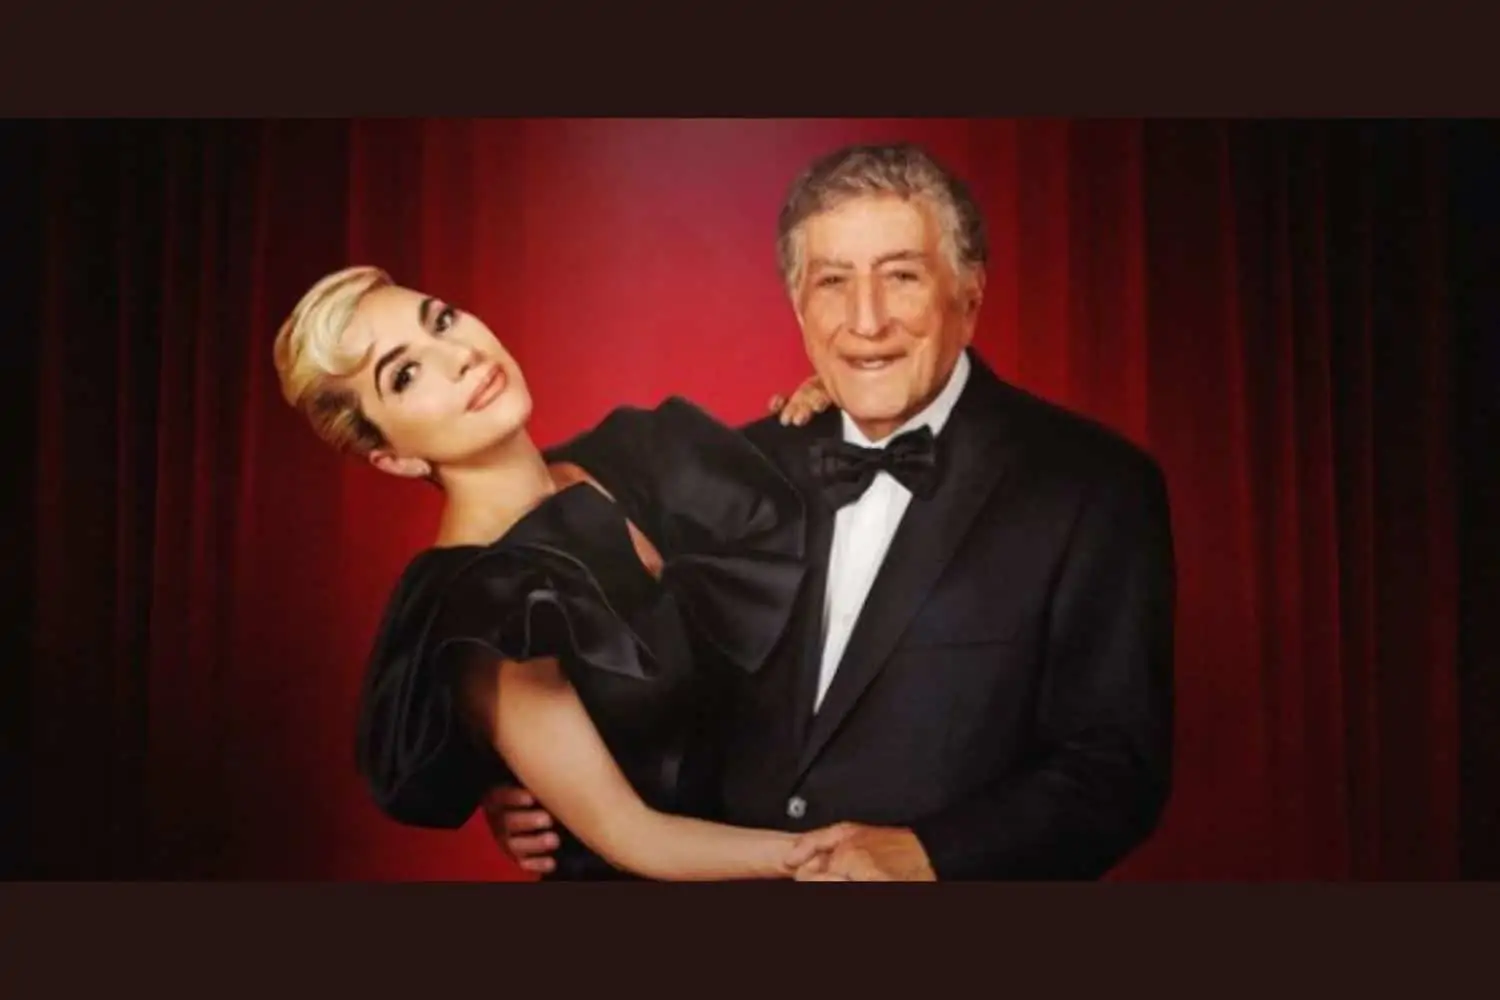 Lady Gaga shares an emotional "thank you" to Tony Bennett in light of Grammy nominations